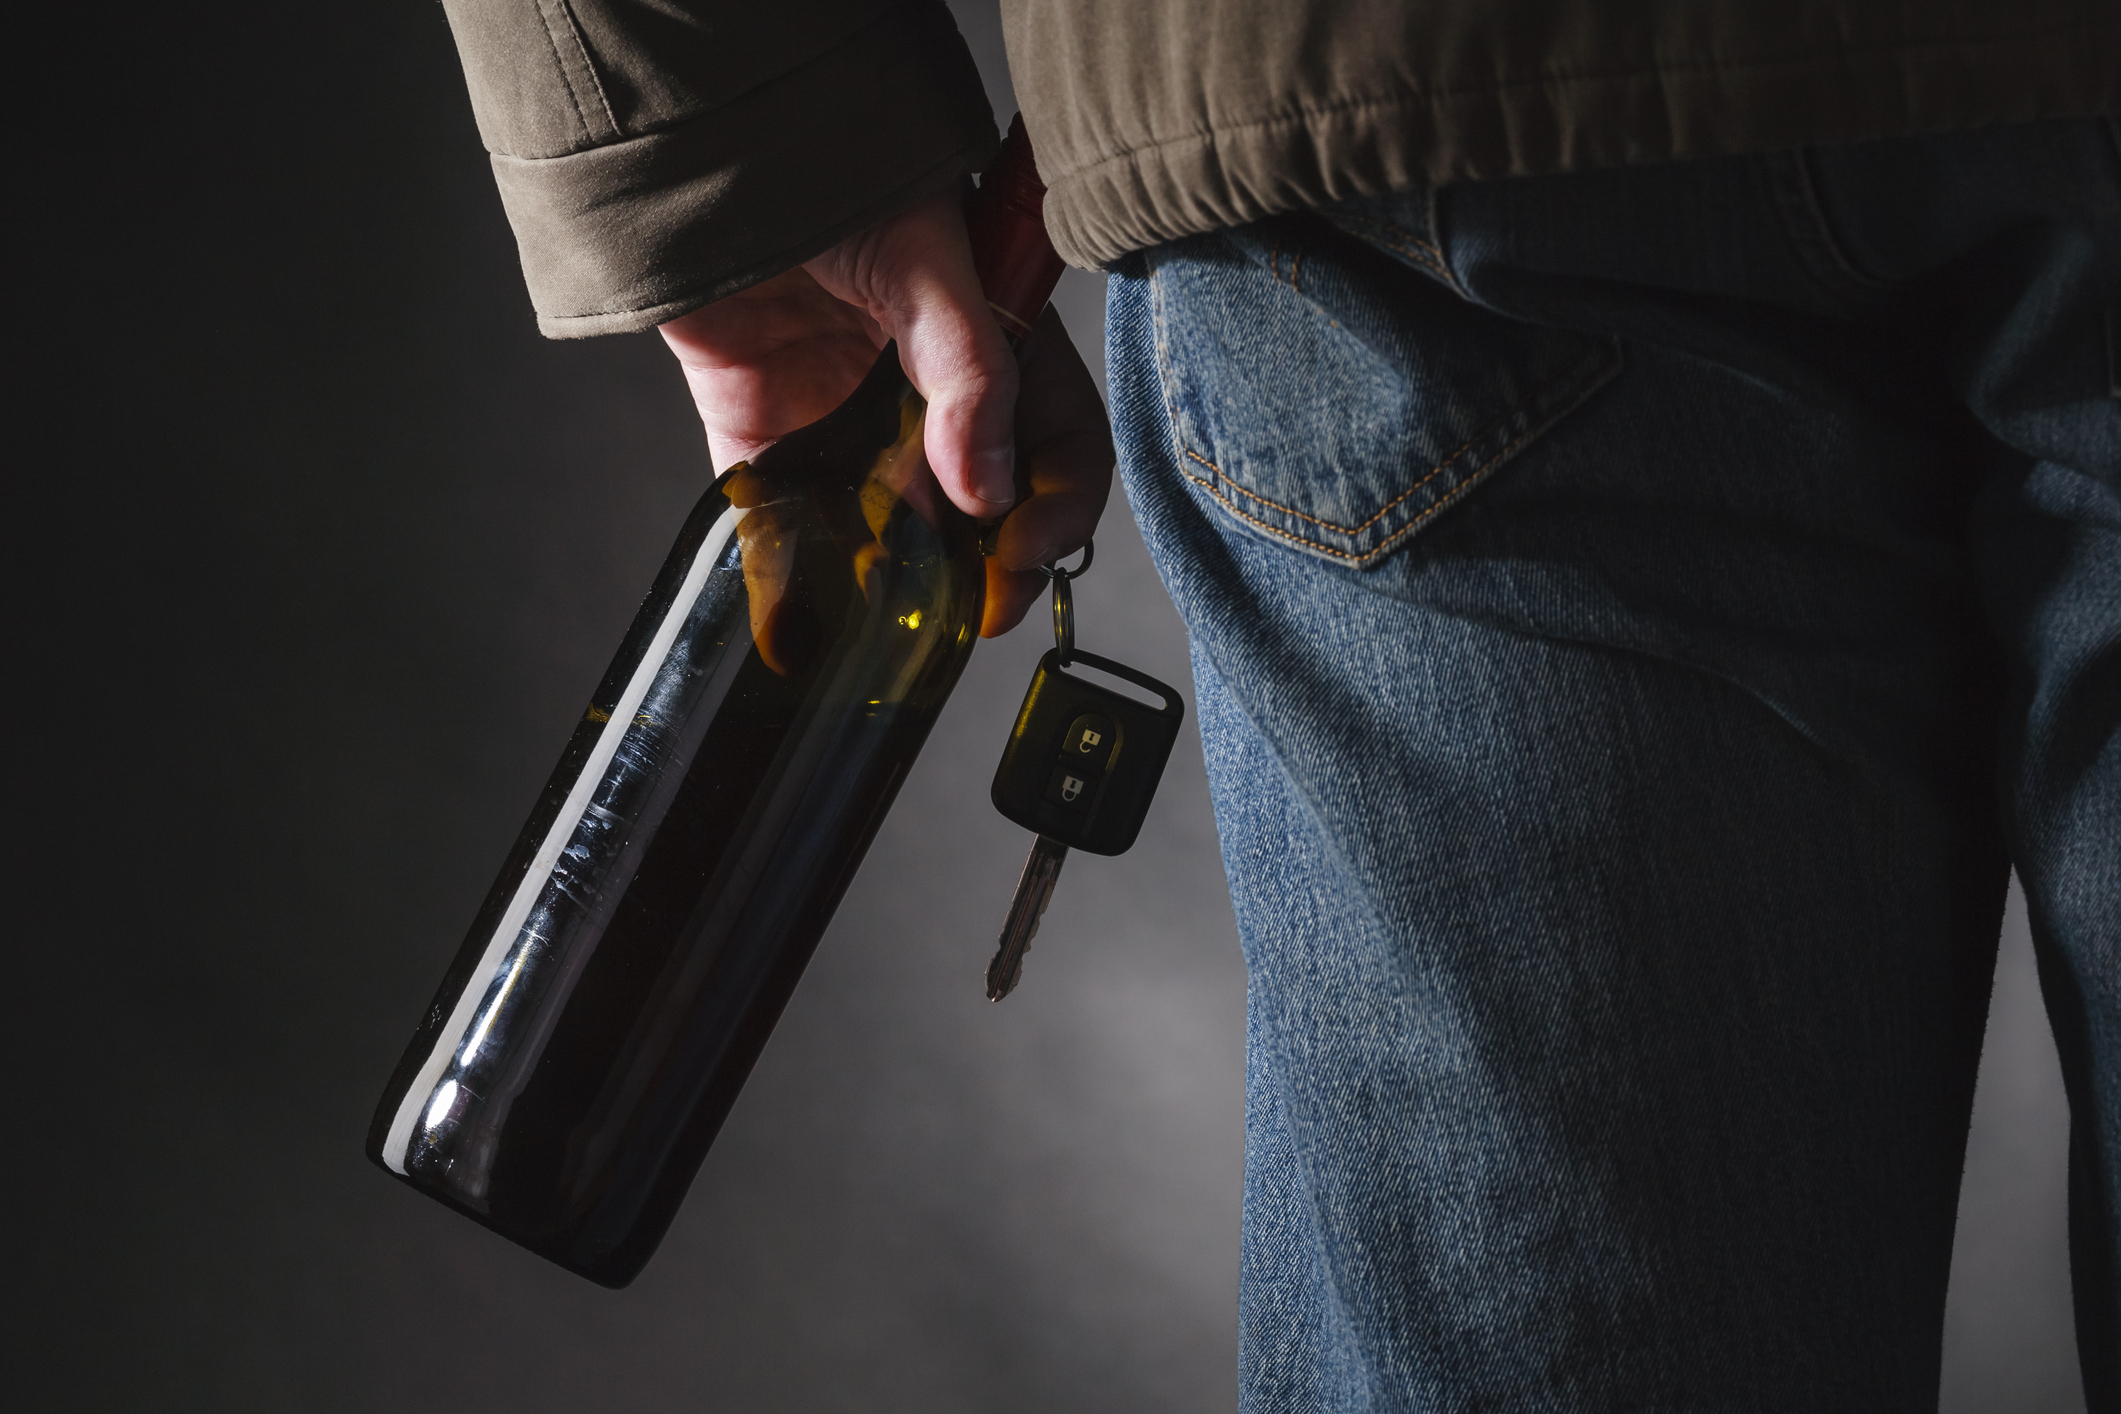 Arrested for drunk driving? Call a Lake Charles DUI lawyer today.